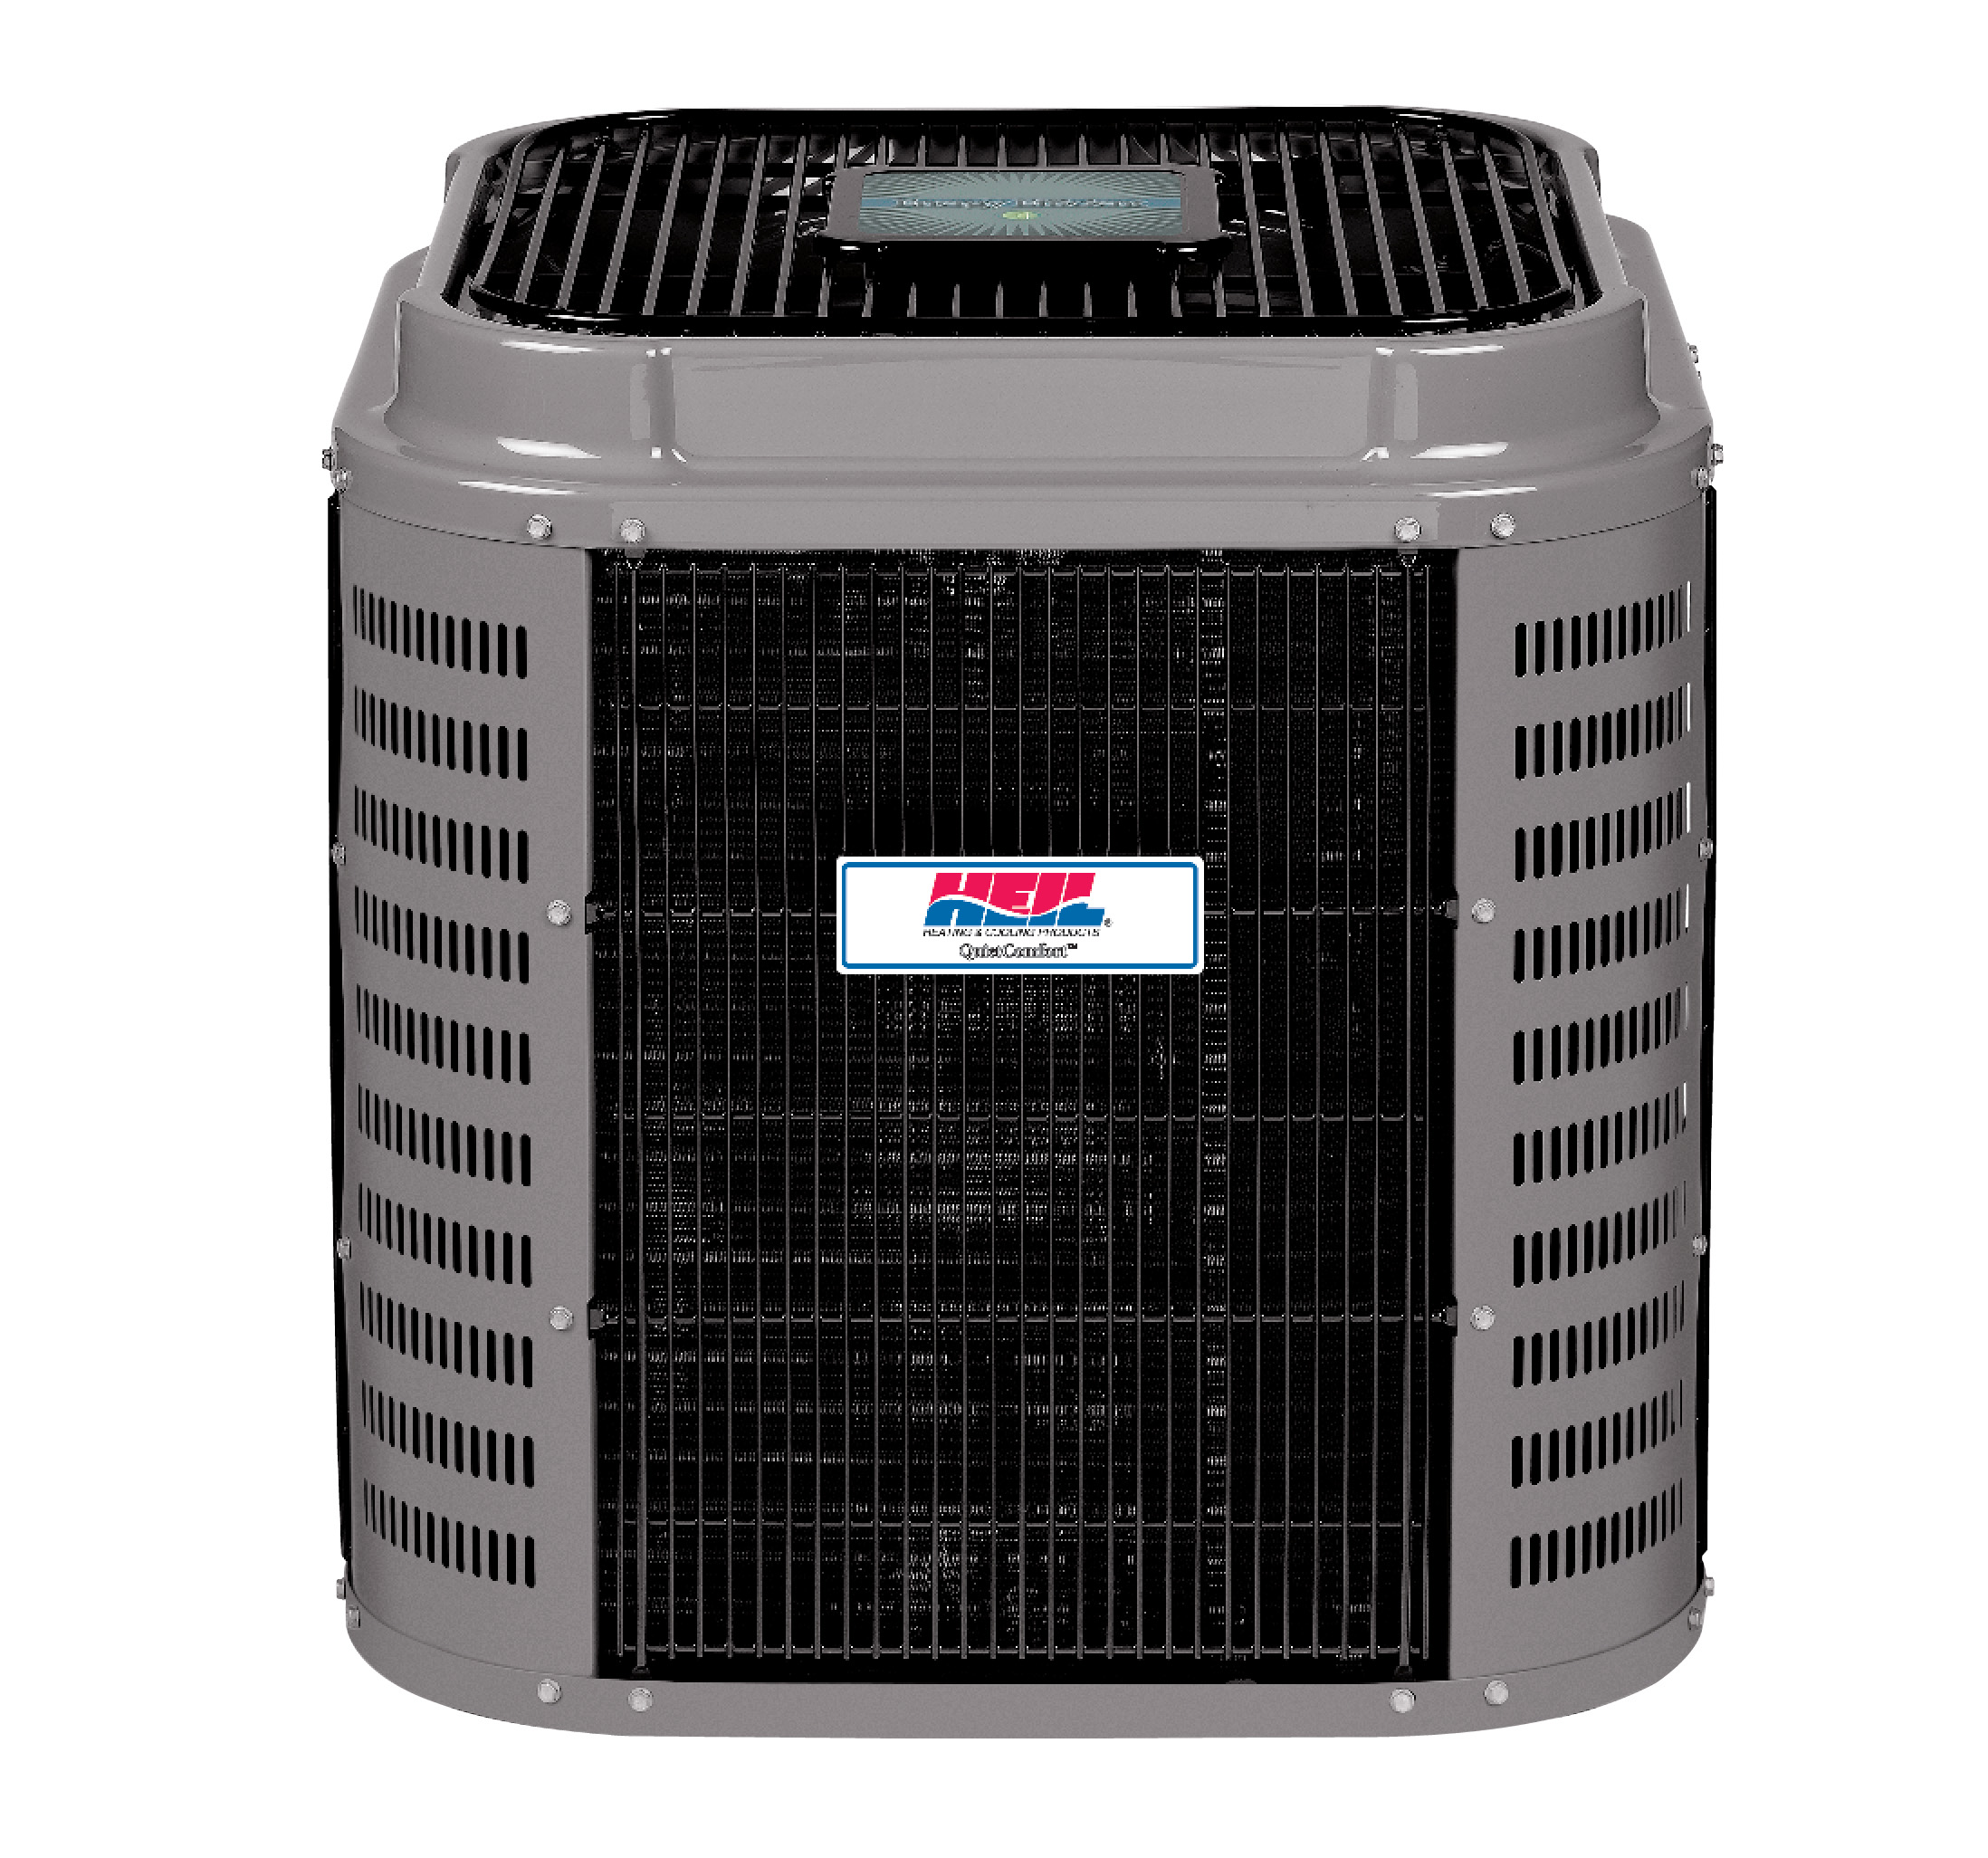 HEIL R410A 2 TON 2 STAGE
COMMUNICATING CONDENSER